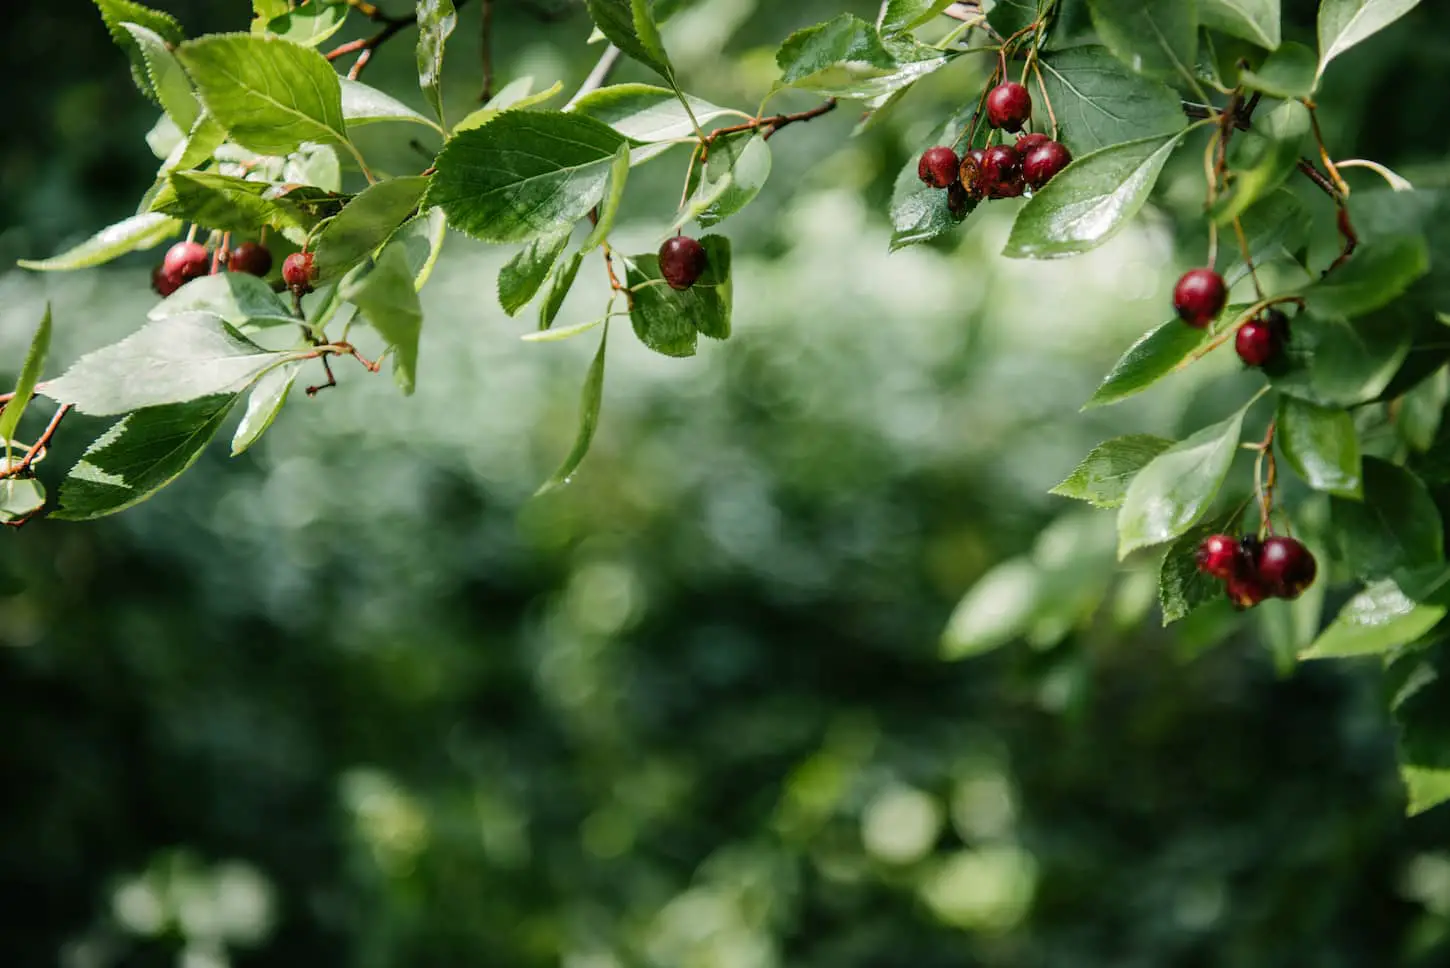 An image of a close-up shot of red berries growing on a tree.